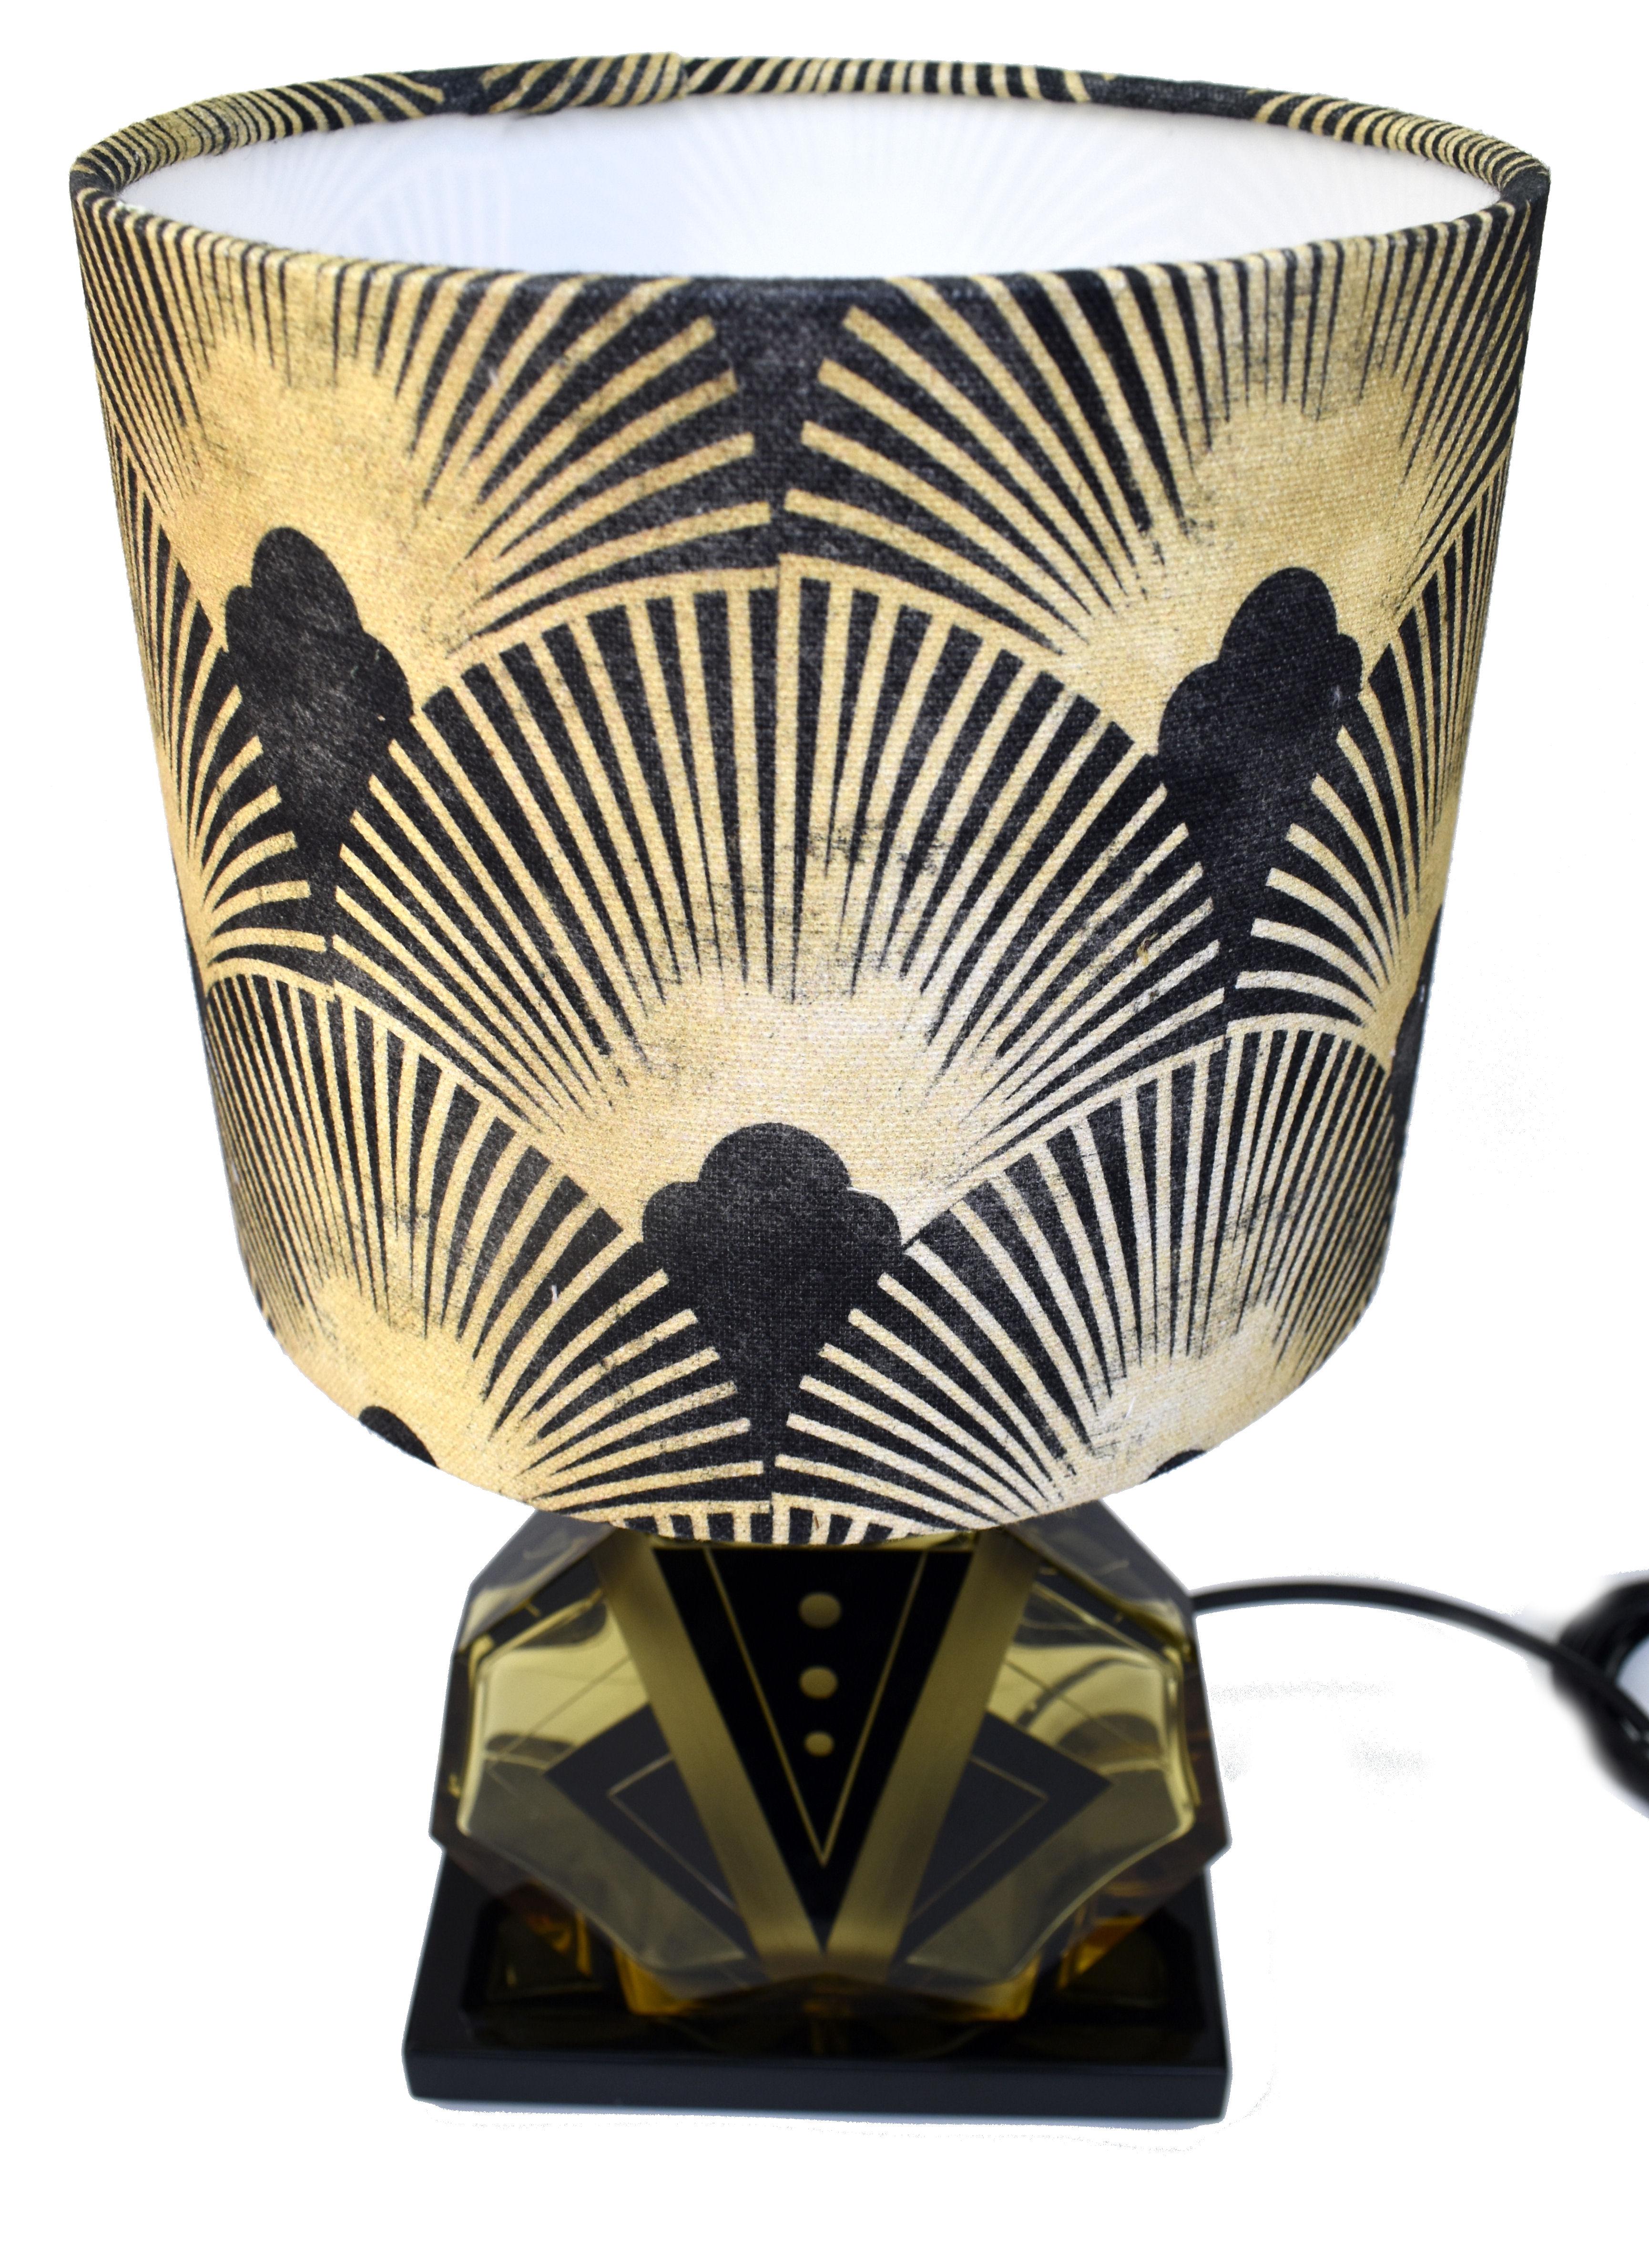 Brass Art Deco Superb Iconic Glass Table Lamp by Karl Palda, C1930